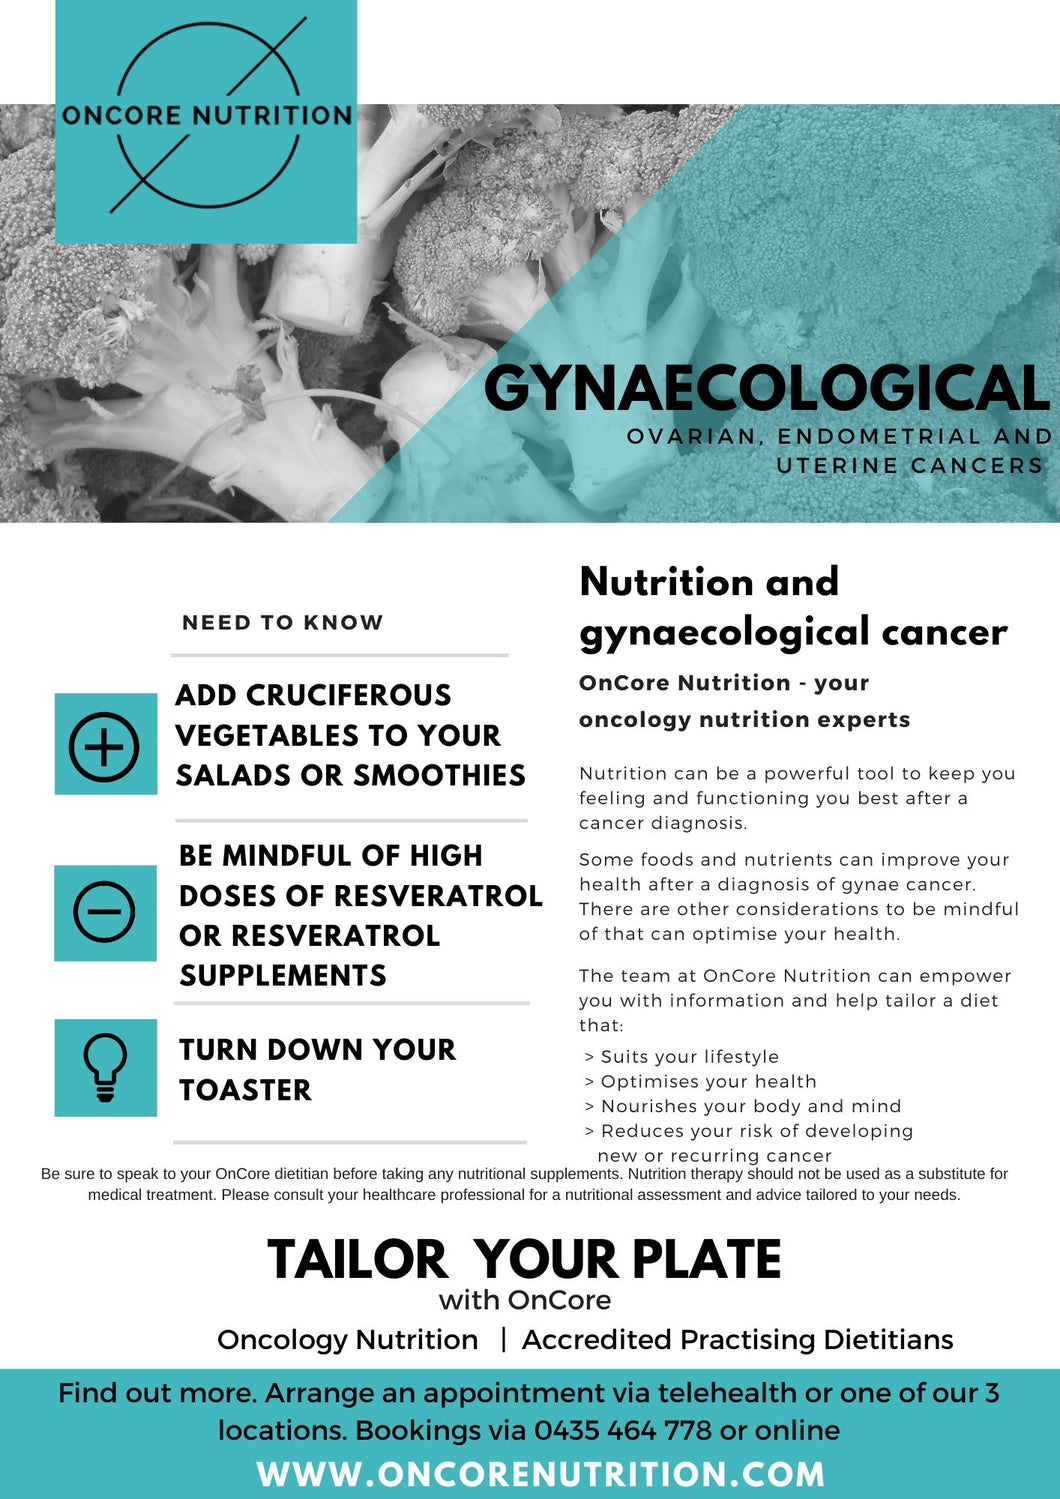 Gynaecological Cancers